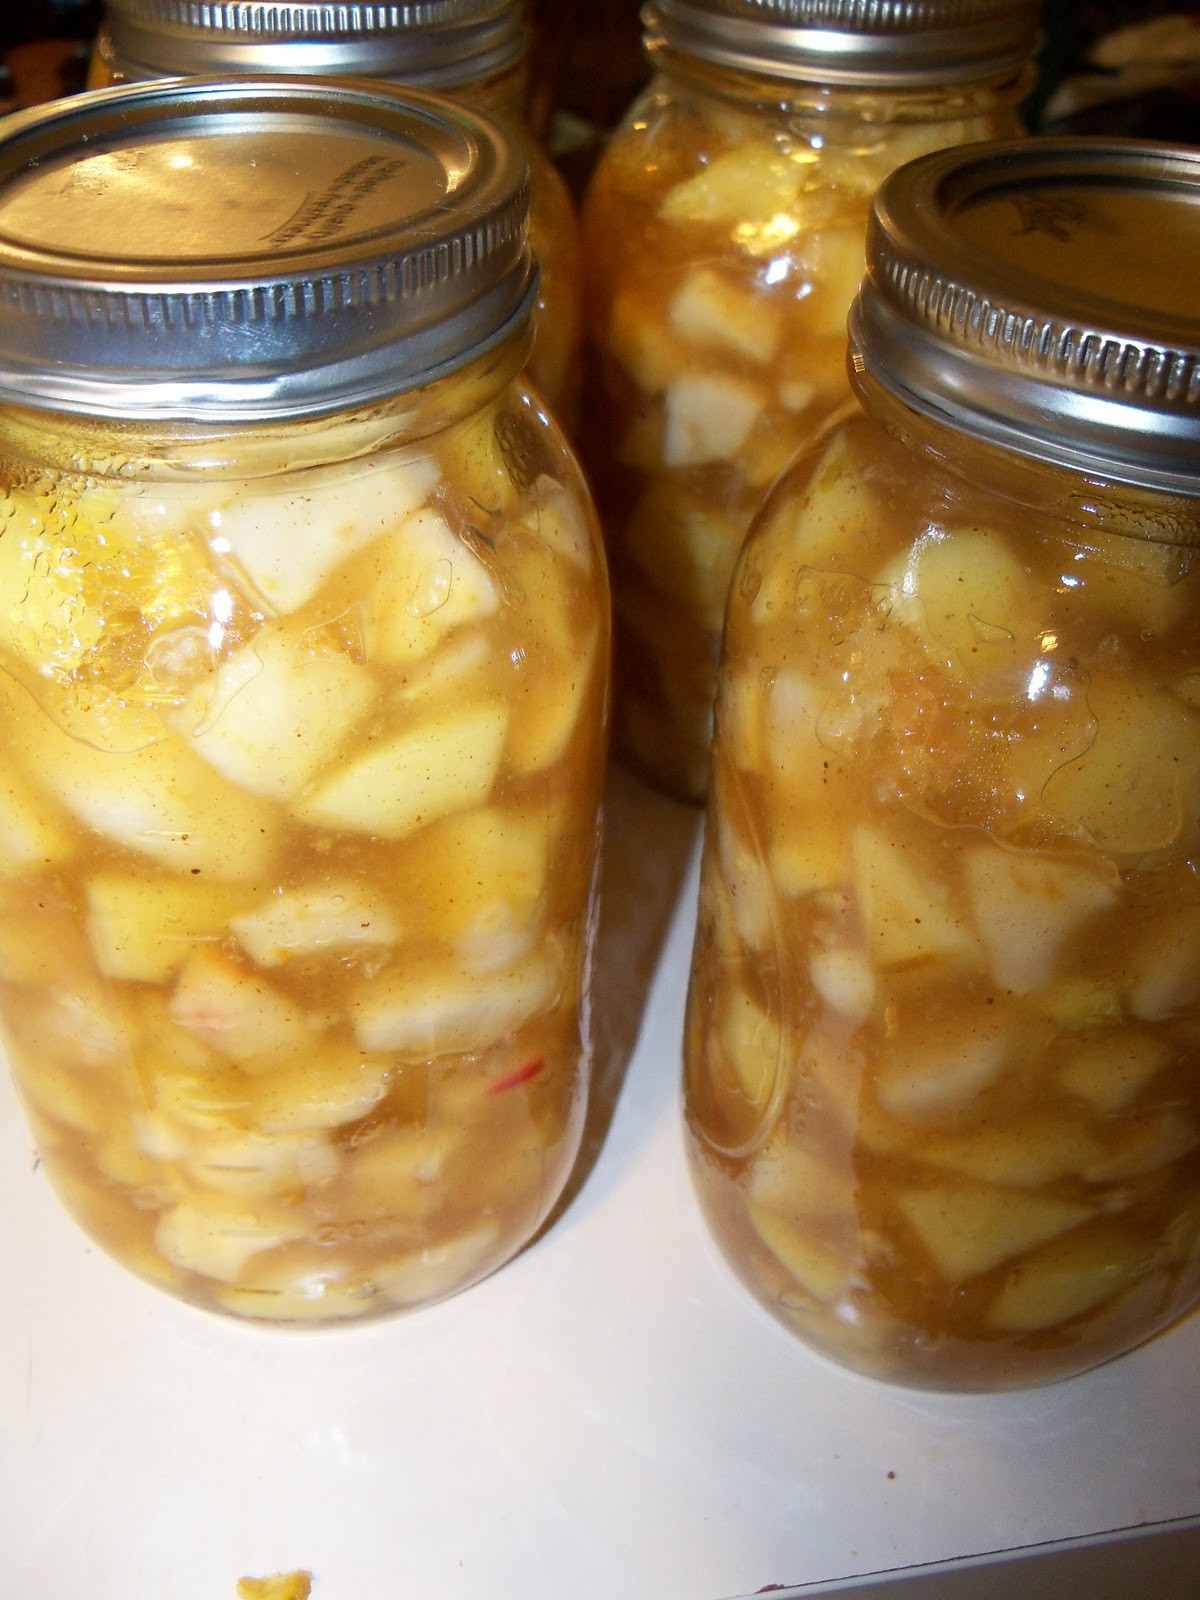 Canning Apple Pie Filling With Clear Jel
 apple pie filling canning recipe without clear jel